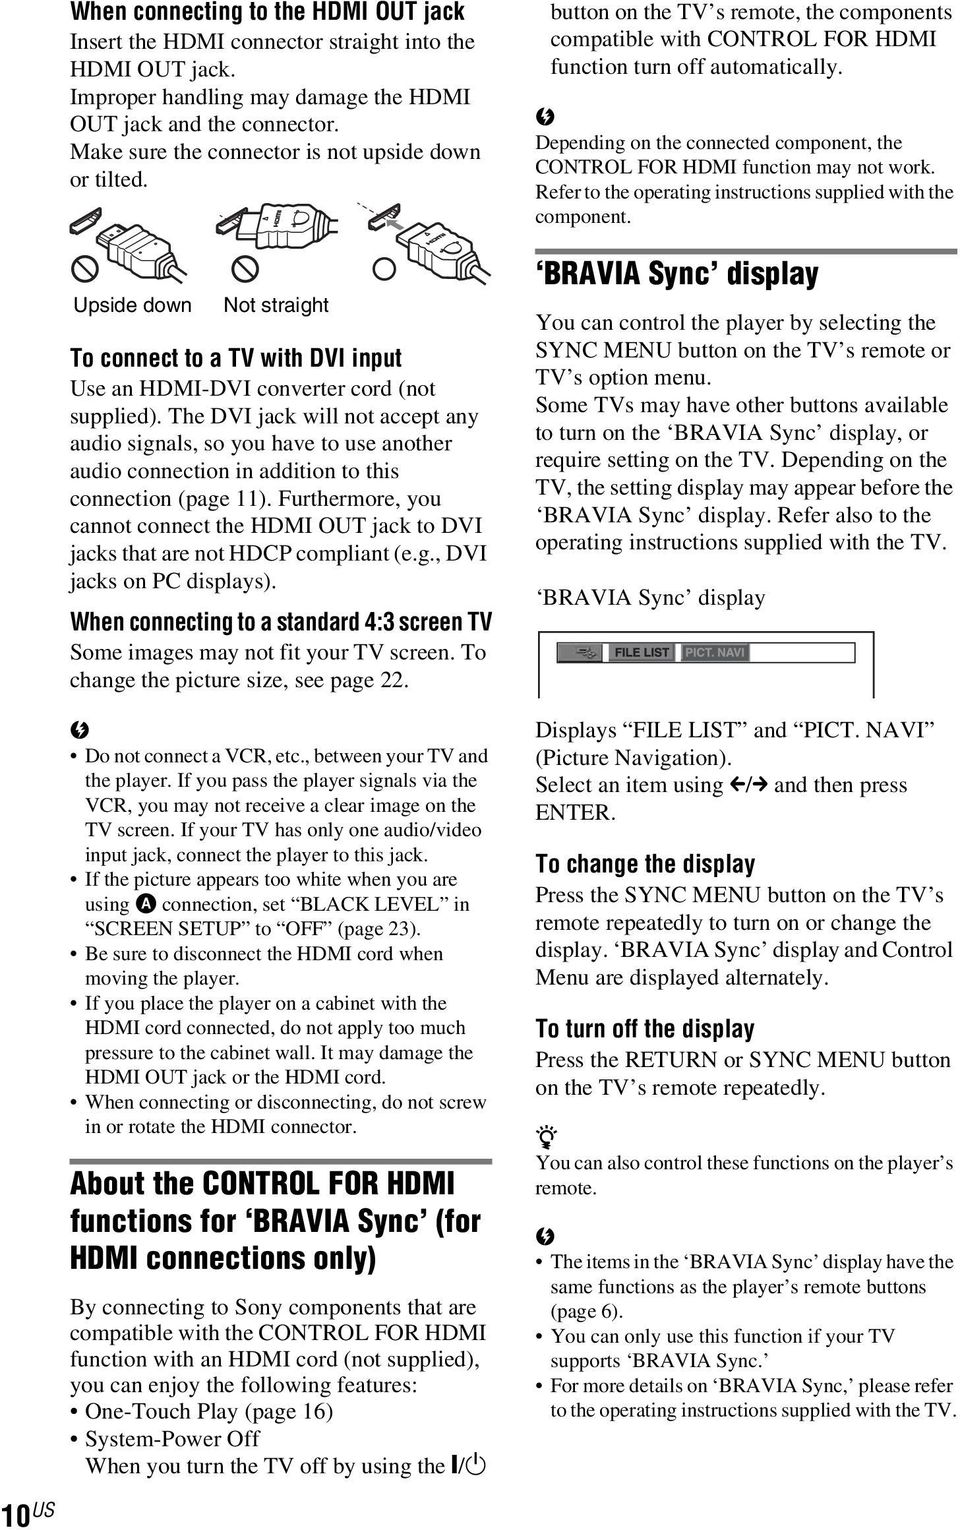 The DVI jack will not accept any audio signals, so you have to use another audio connection in addition to this connection (page 11).